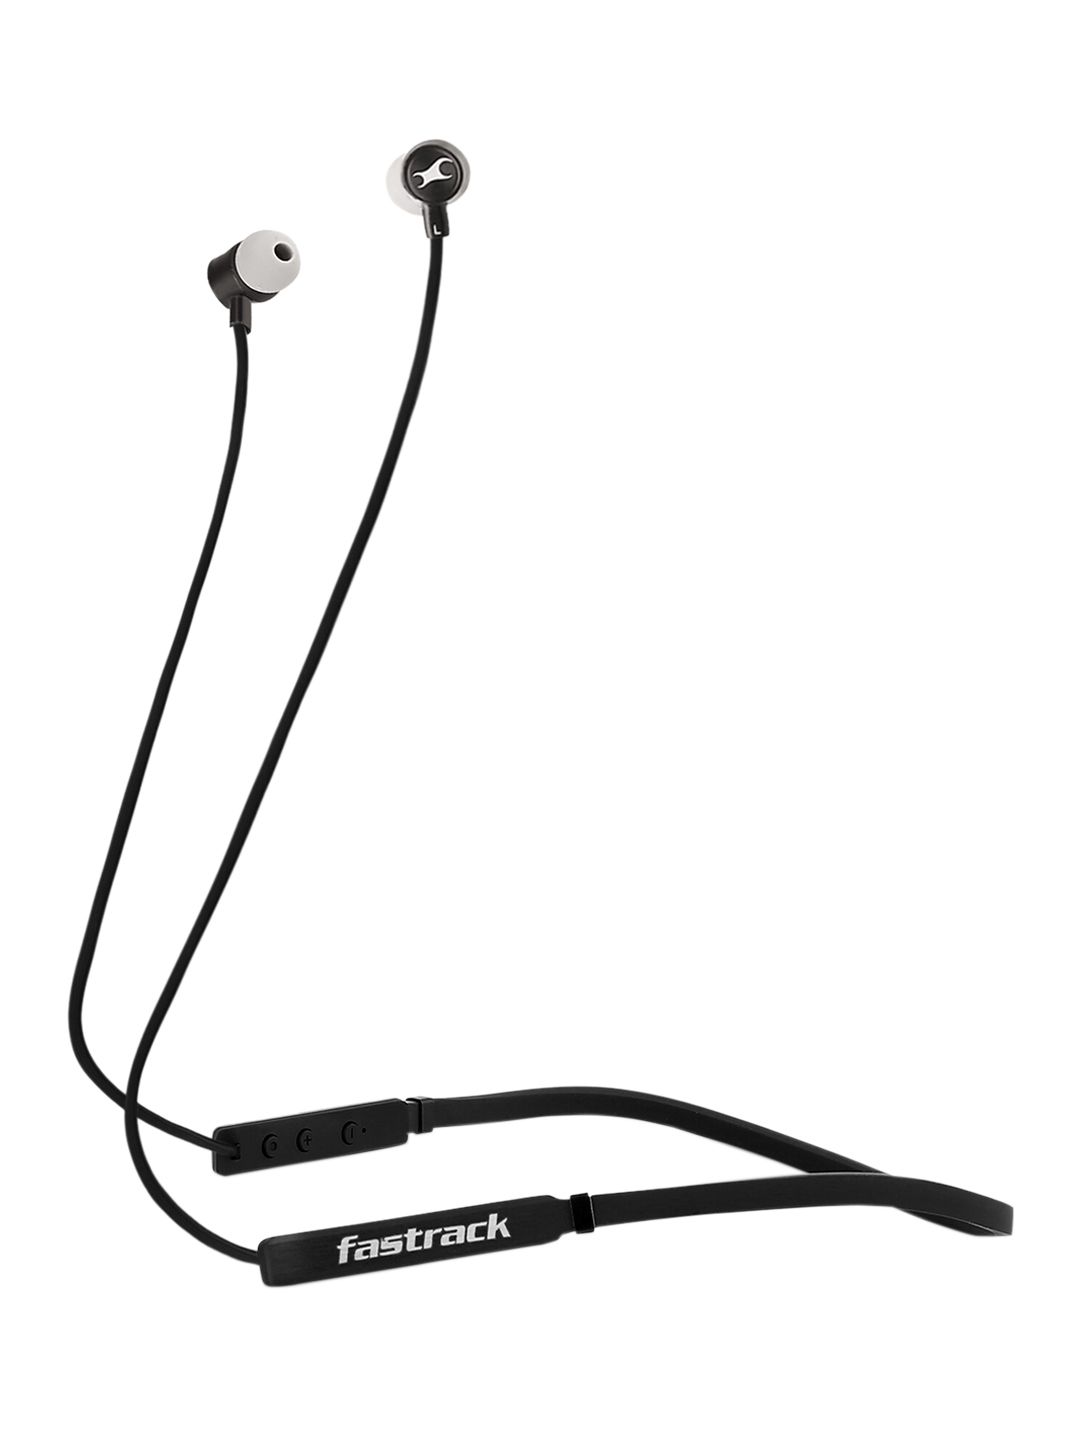 Fastrack Unisex Black Solid Wireless In Ear Headphones Price in India